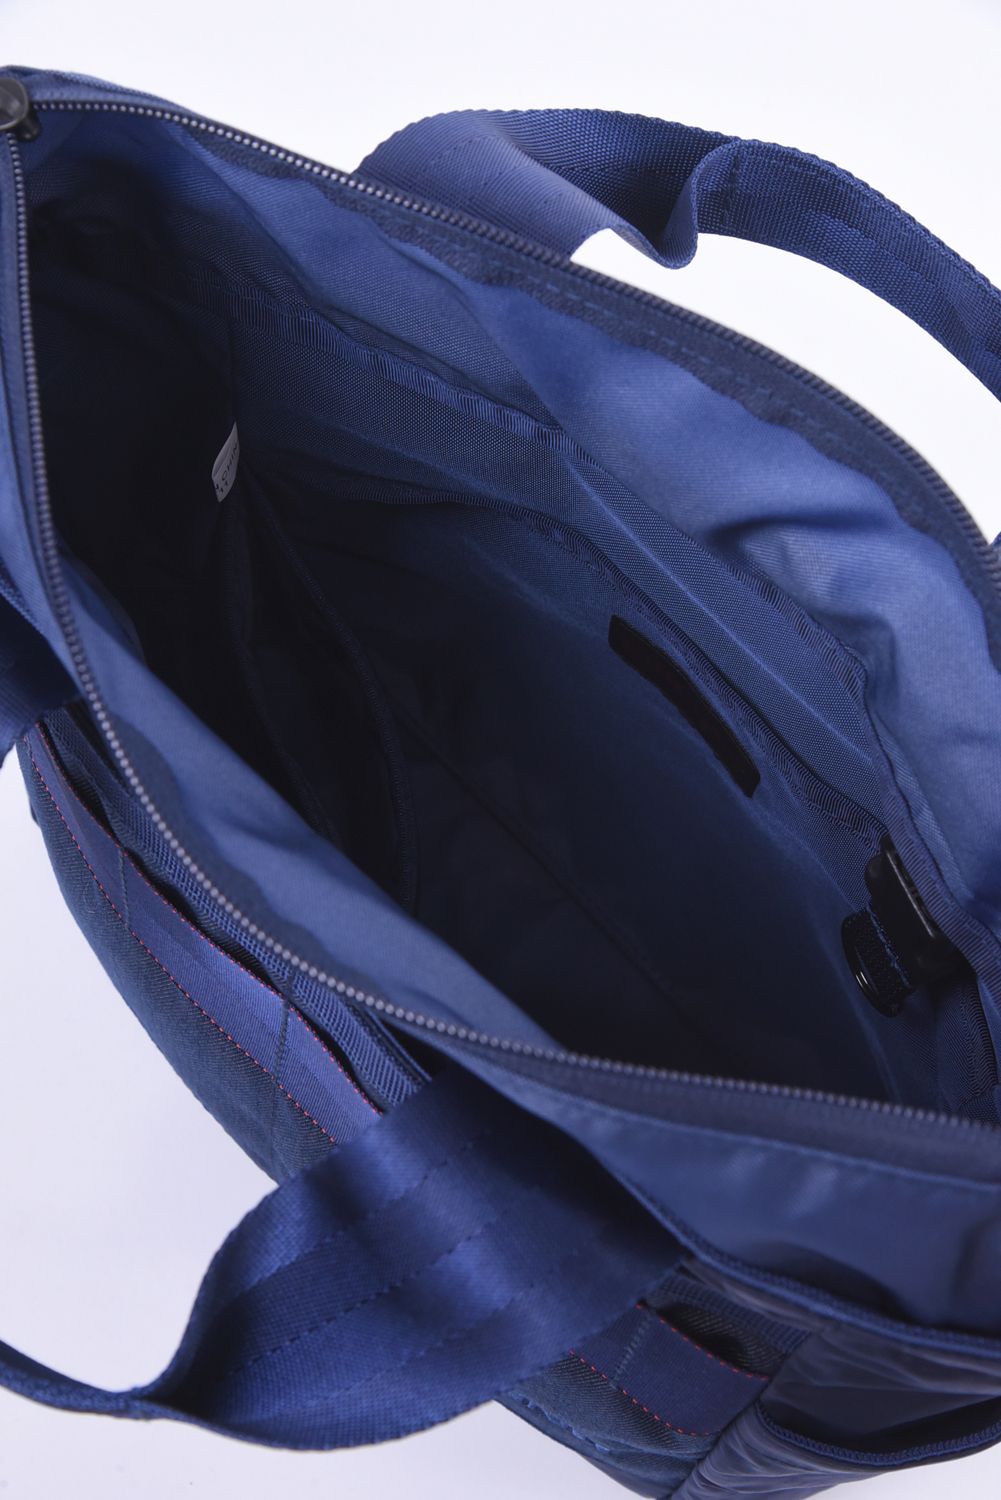 BRIEFING - 【AZURE COLLECTION】 CART TOTE HOLIDAY 